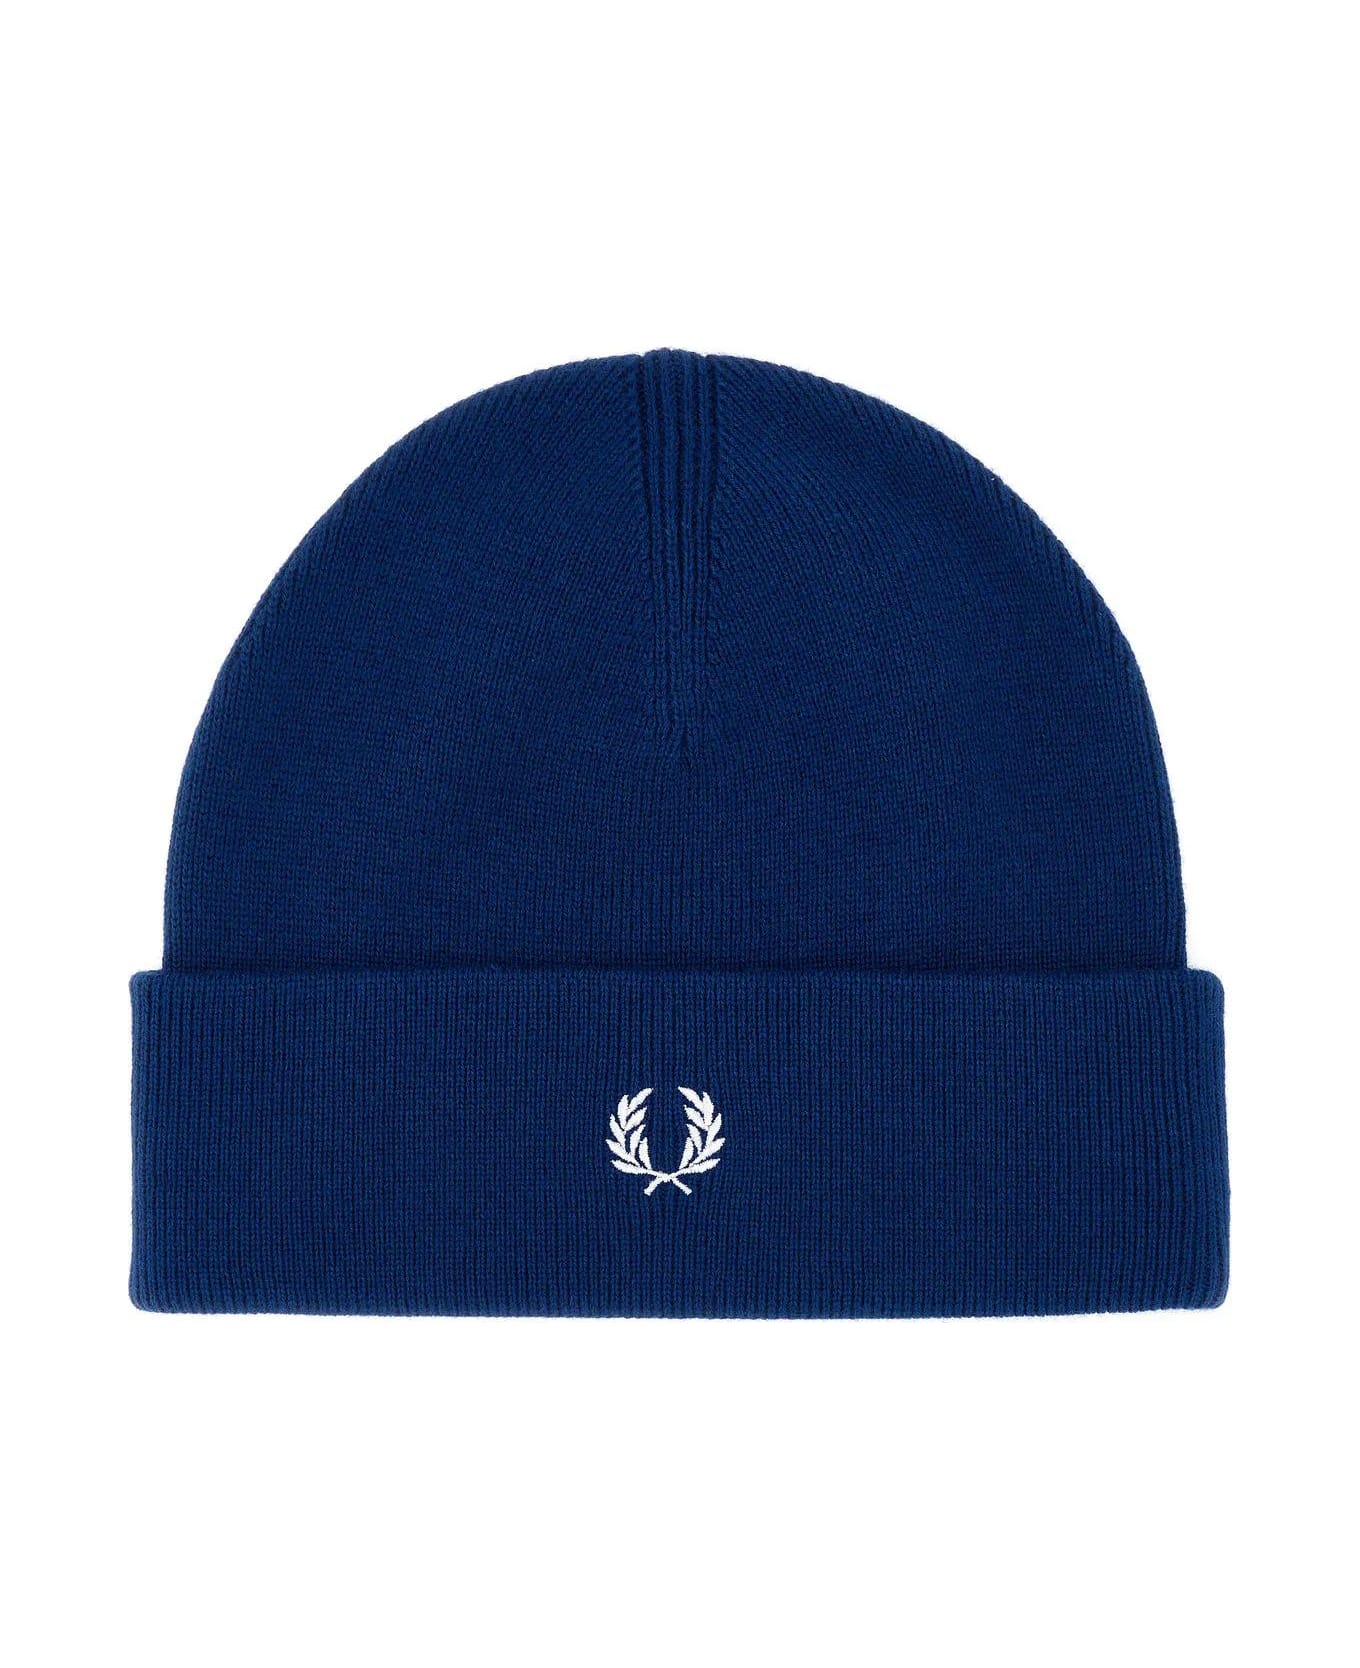 Fred Perry Electric Blue Wool Blend Beanie Hat - BLUE